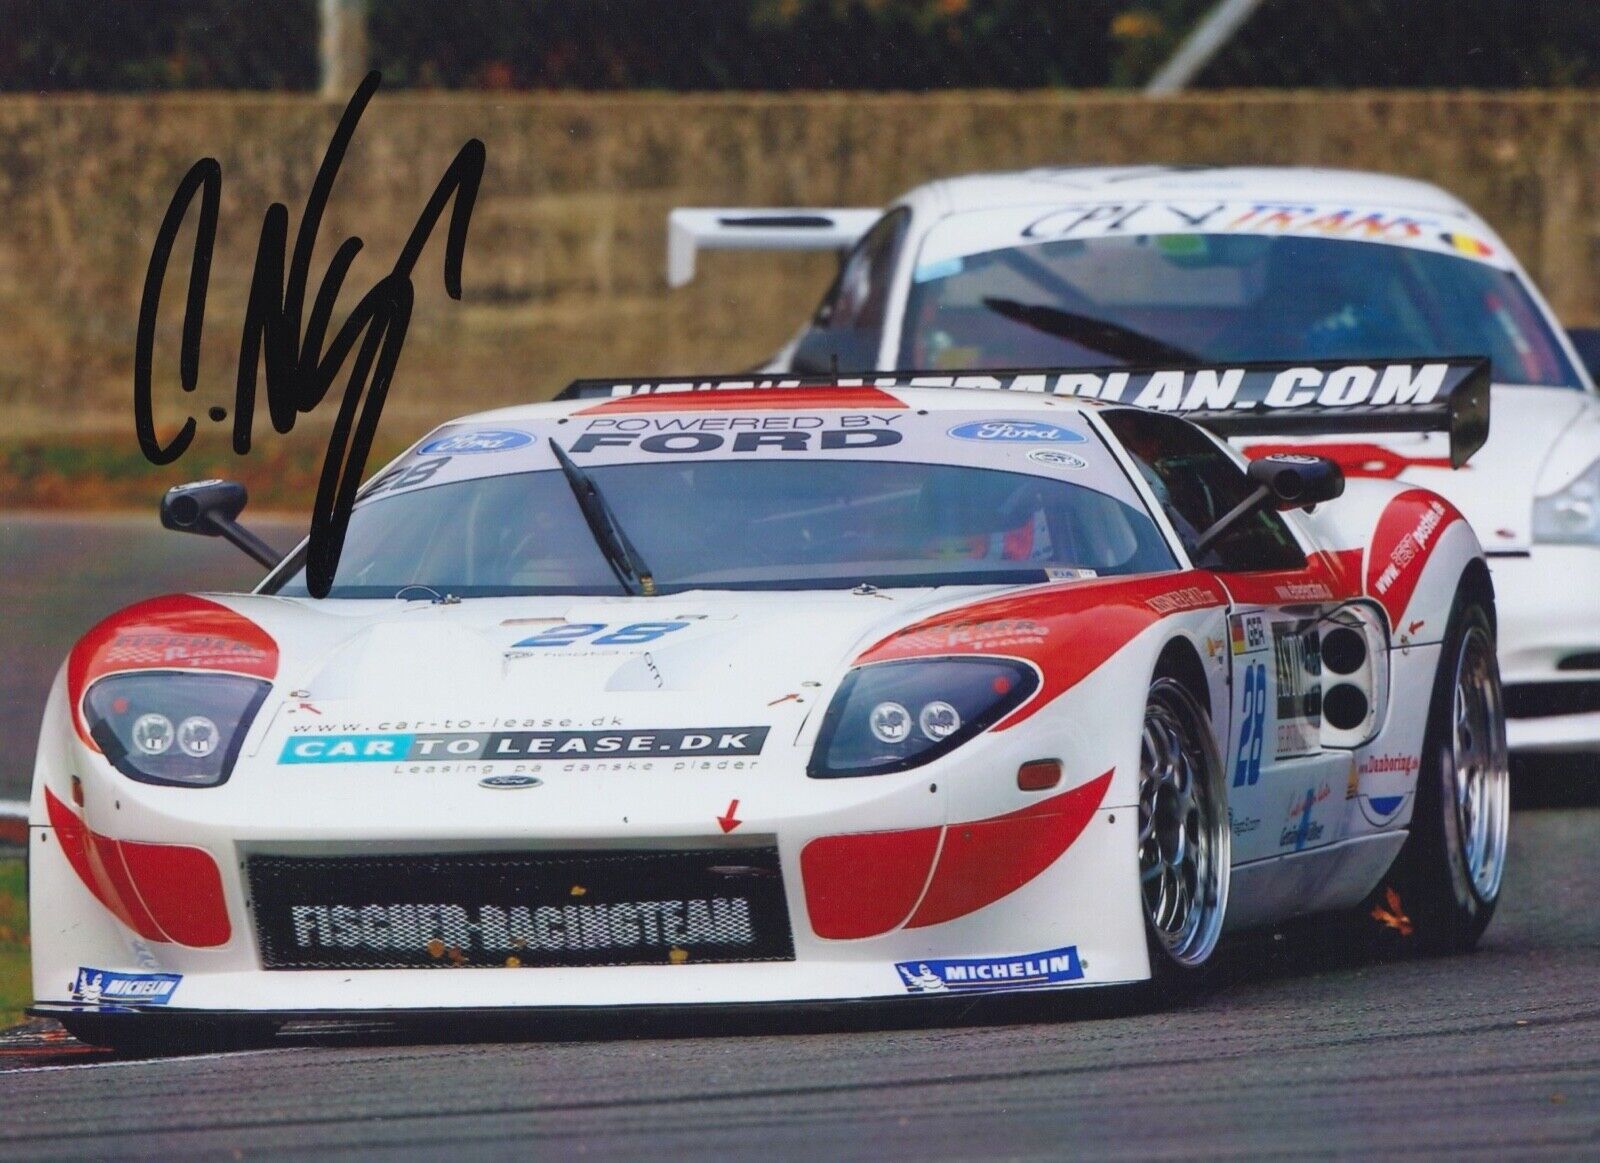 Christoffer Nygaard Hand Signed 7x5 Photo Poster painting - FIA GT Championship 1.